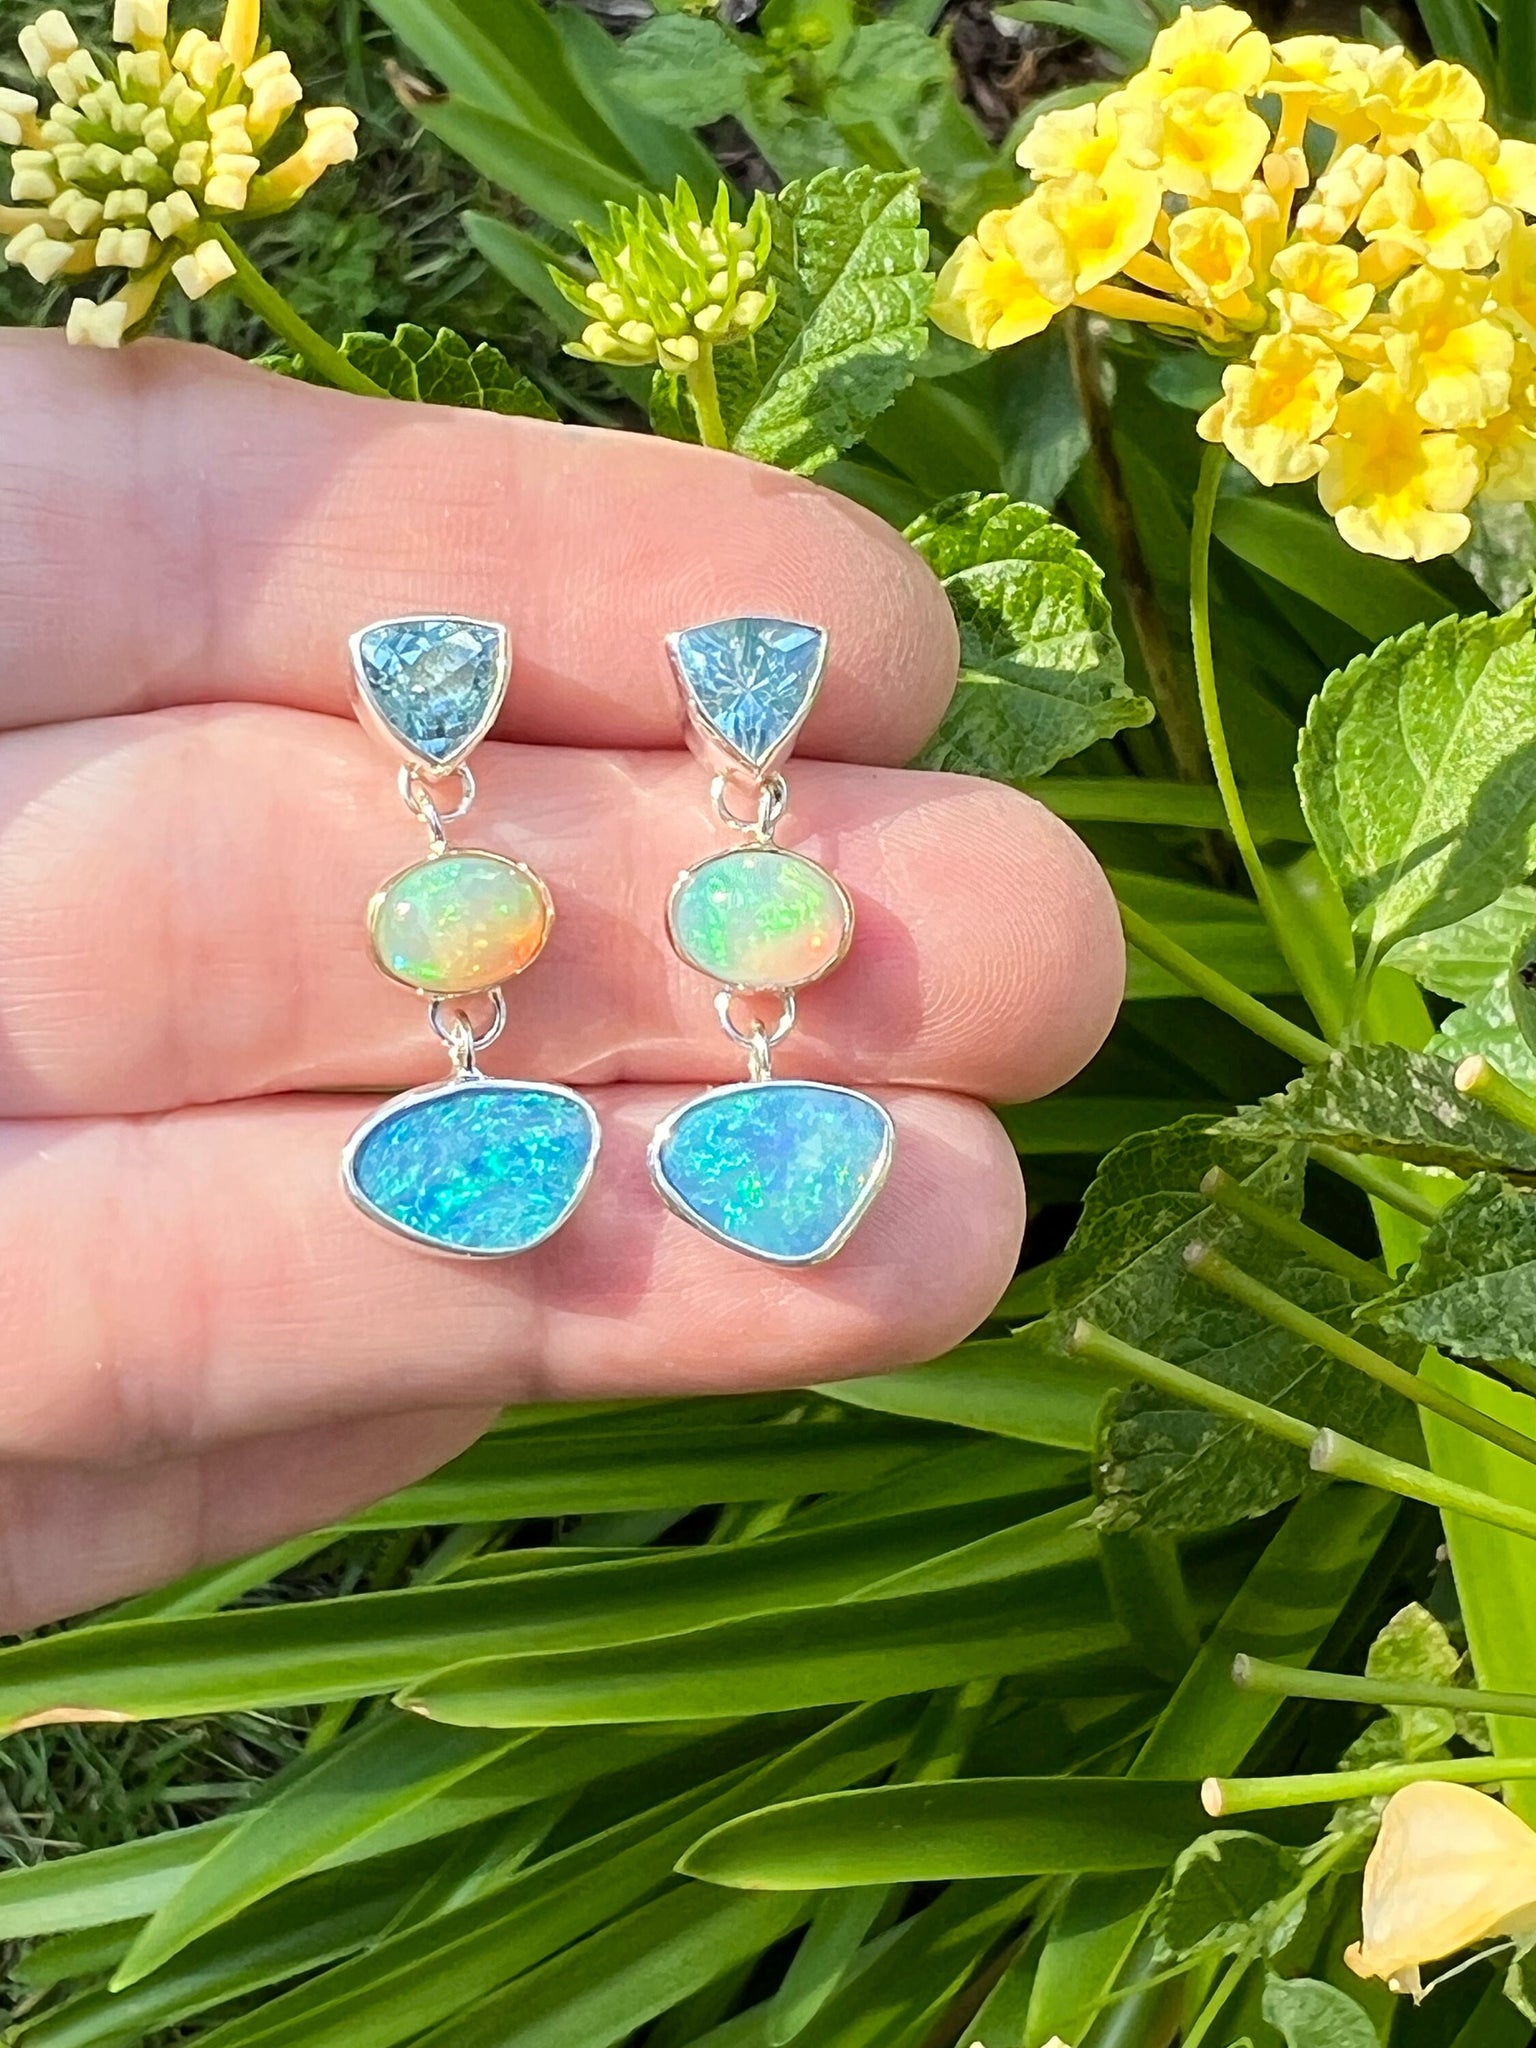 Aquamarine, Ethiopian Opal and Australian Opal Earrings in Sterling Silver and 14k Gold